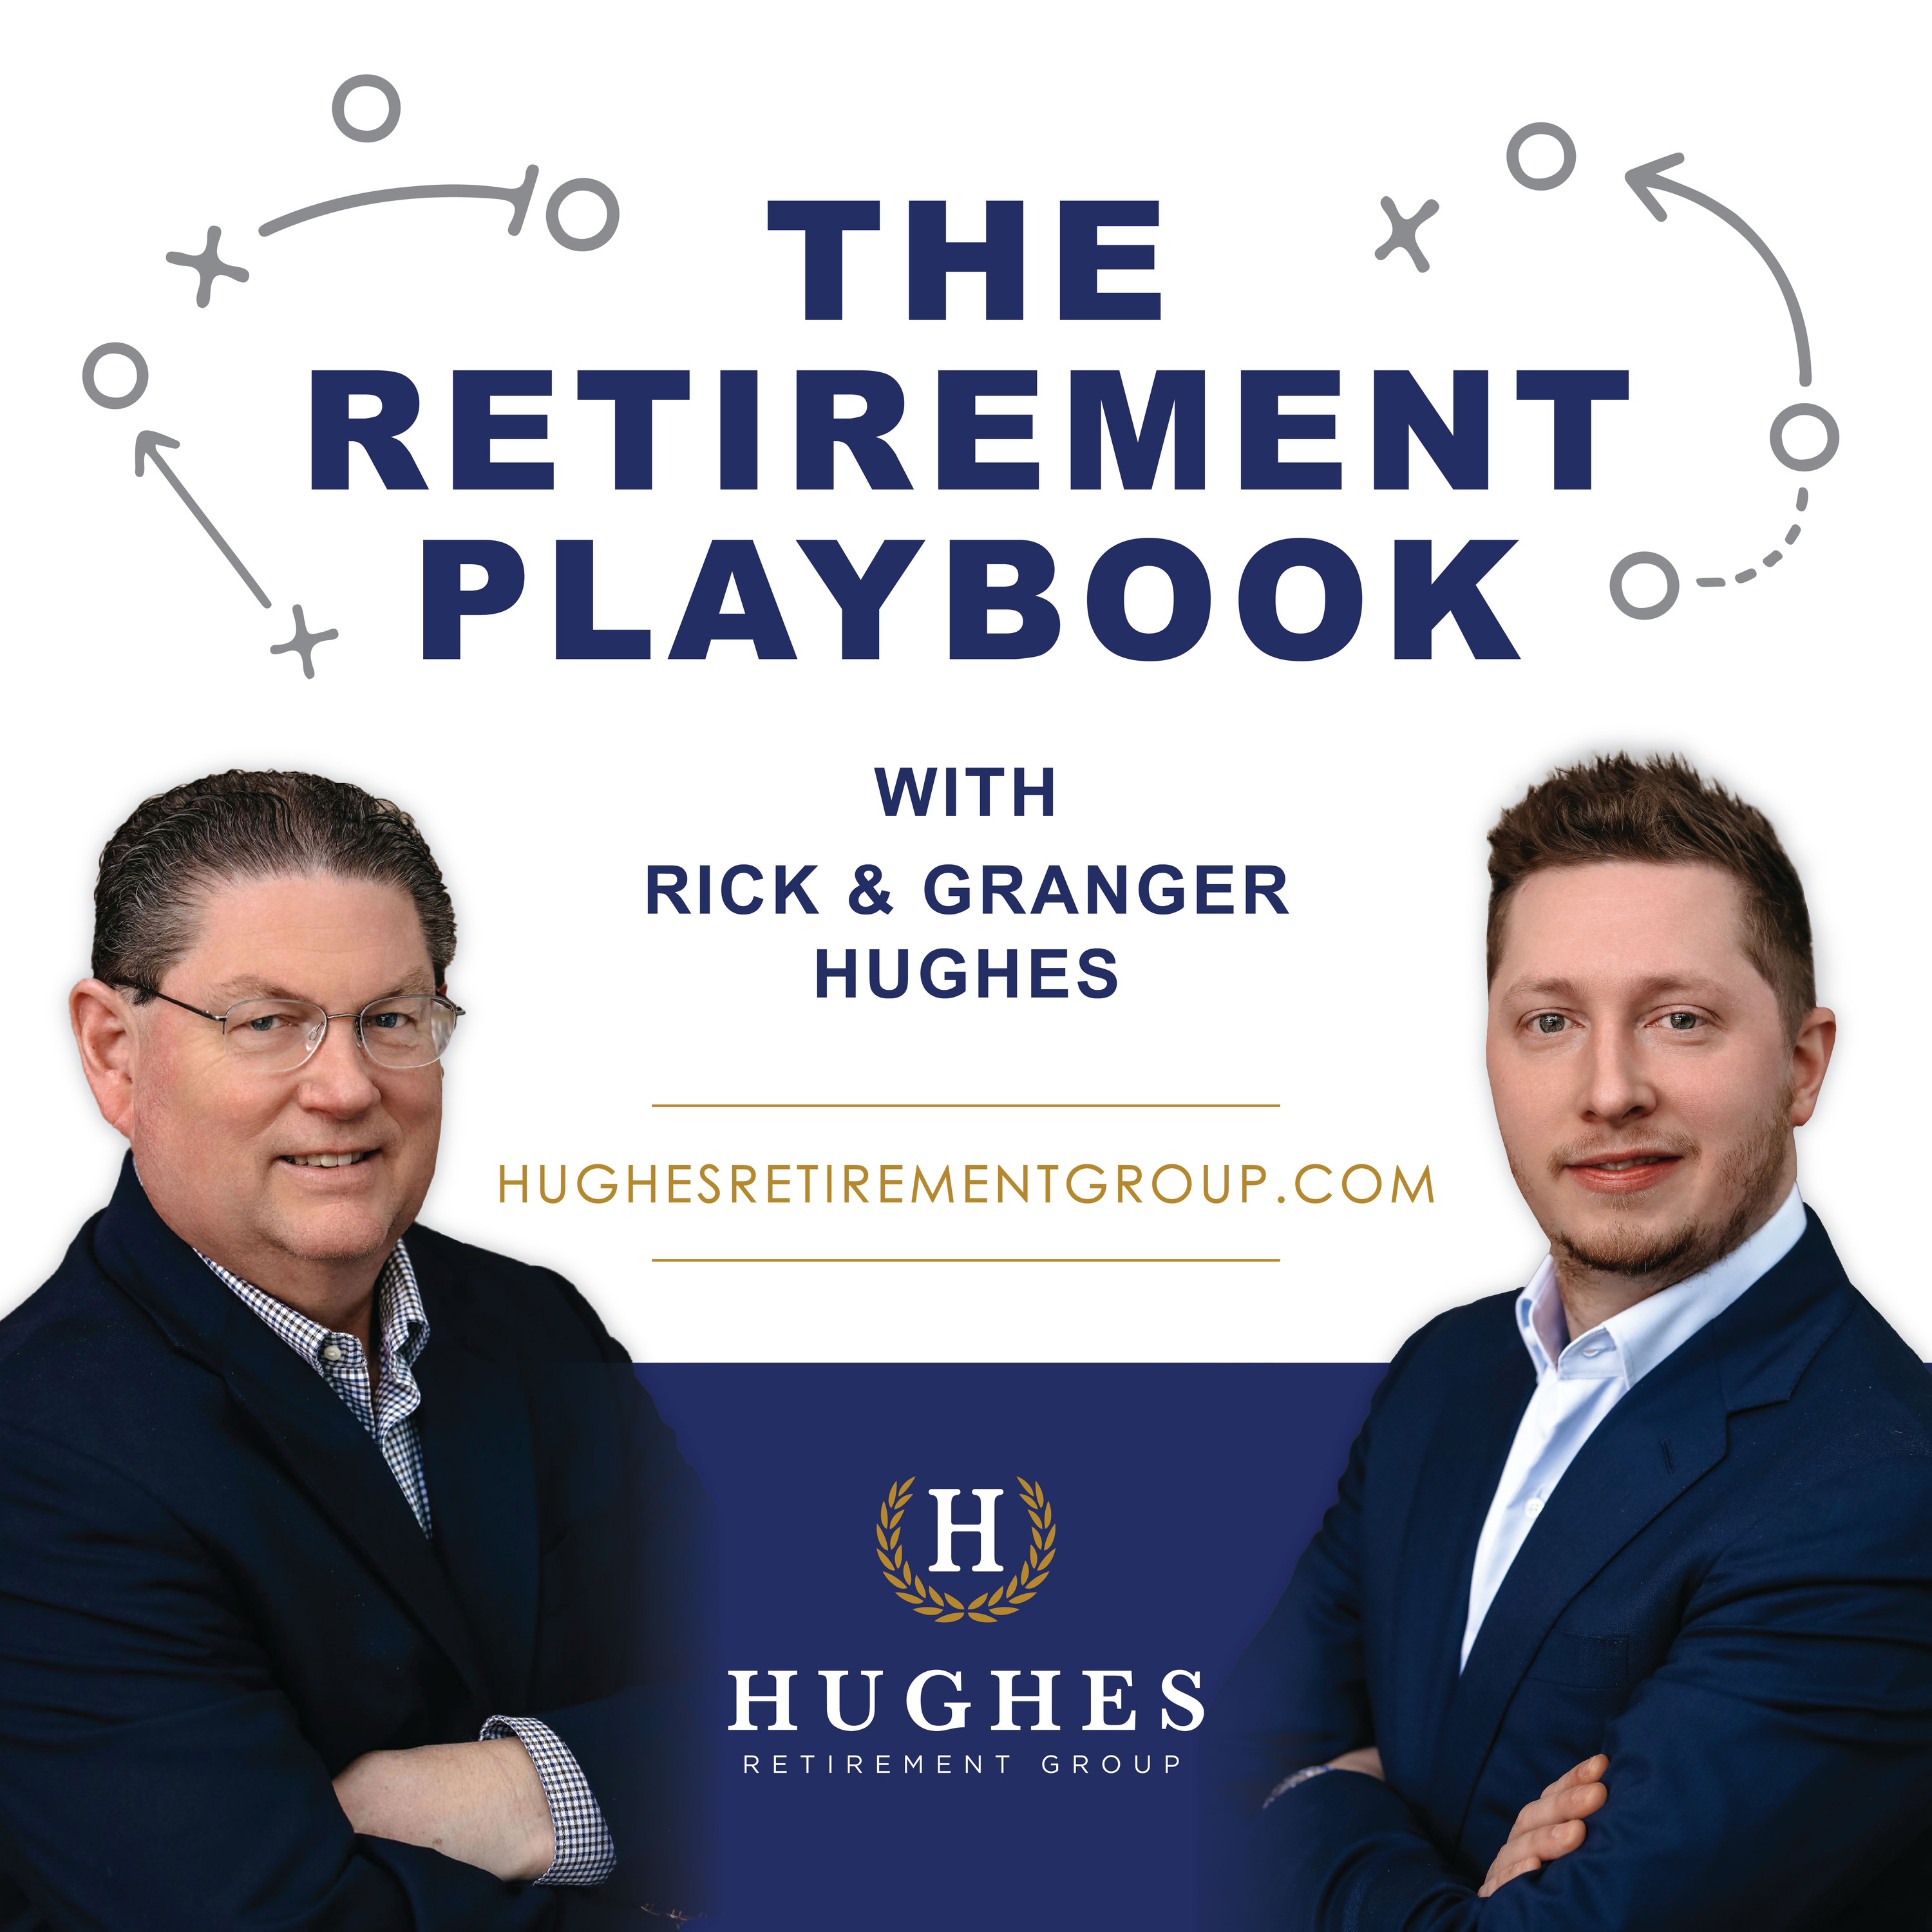 The Retirement Playbook